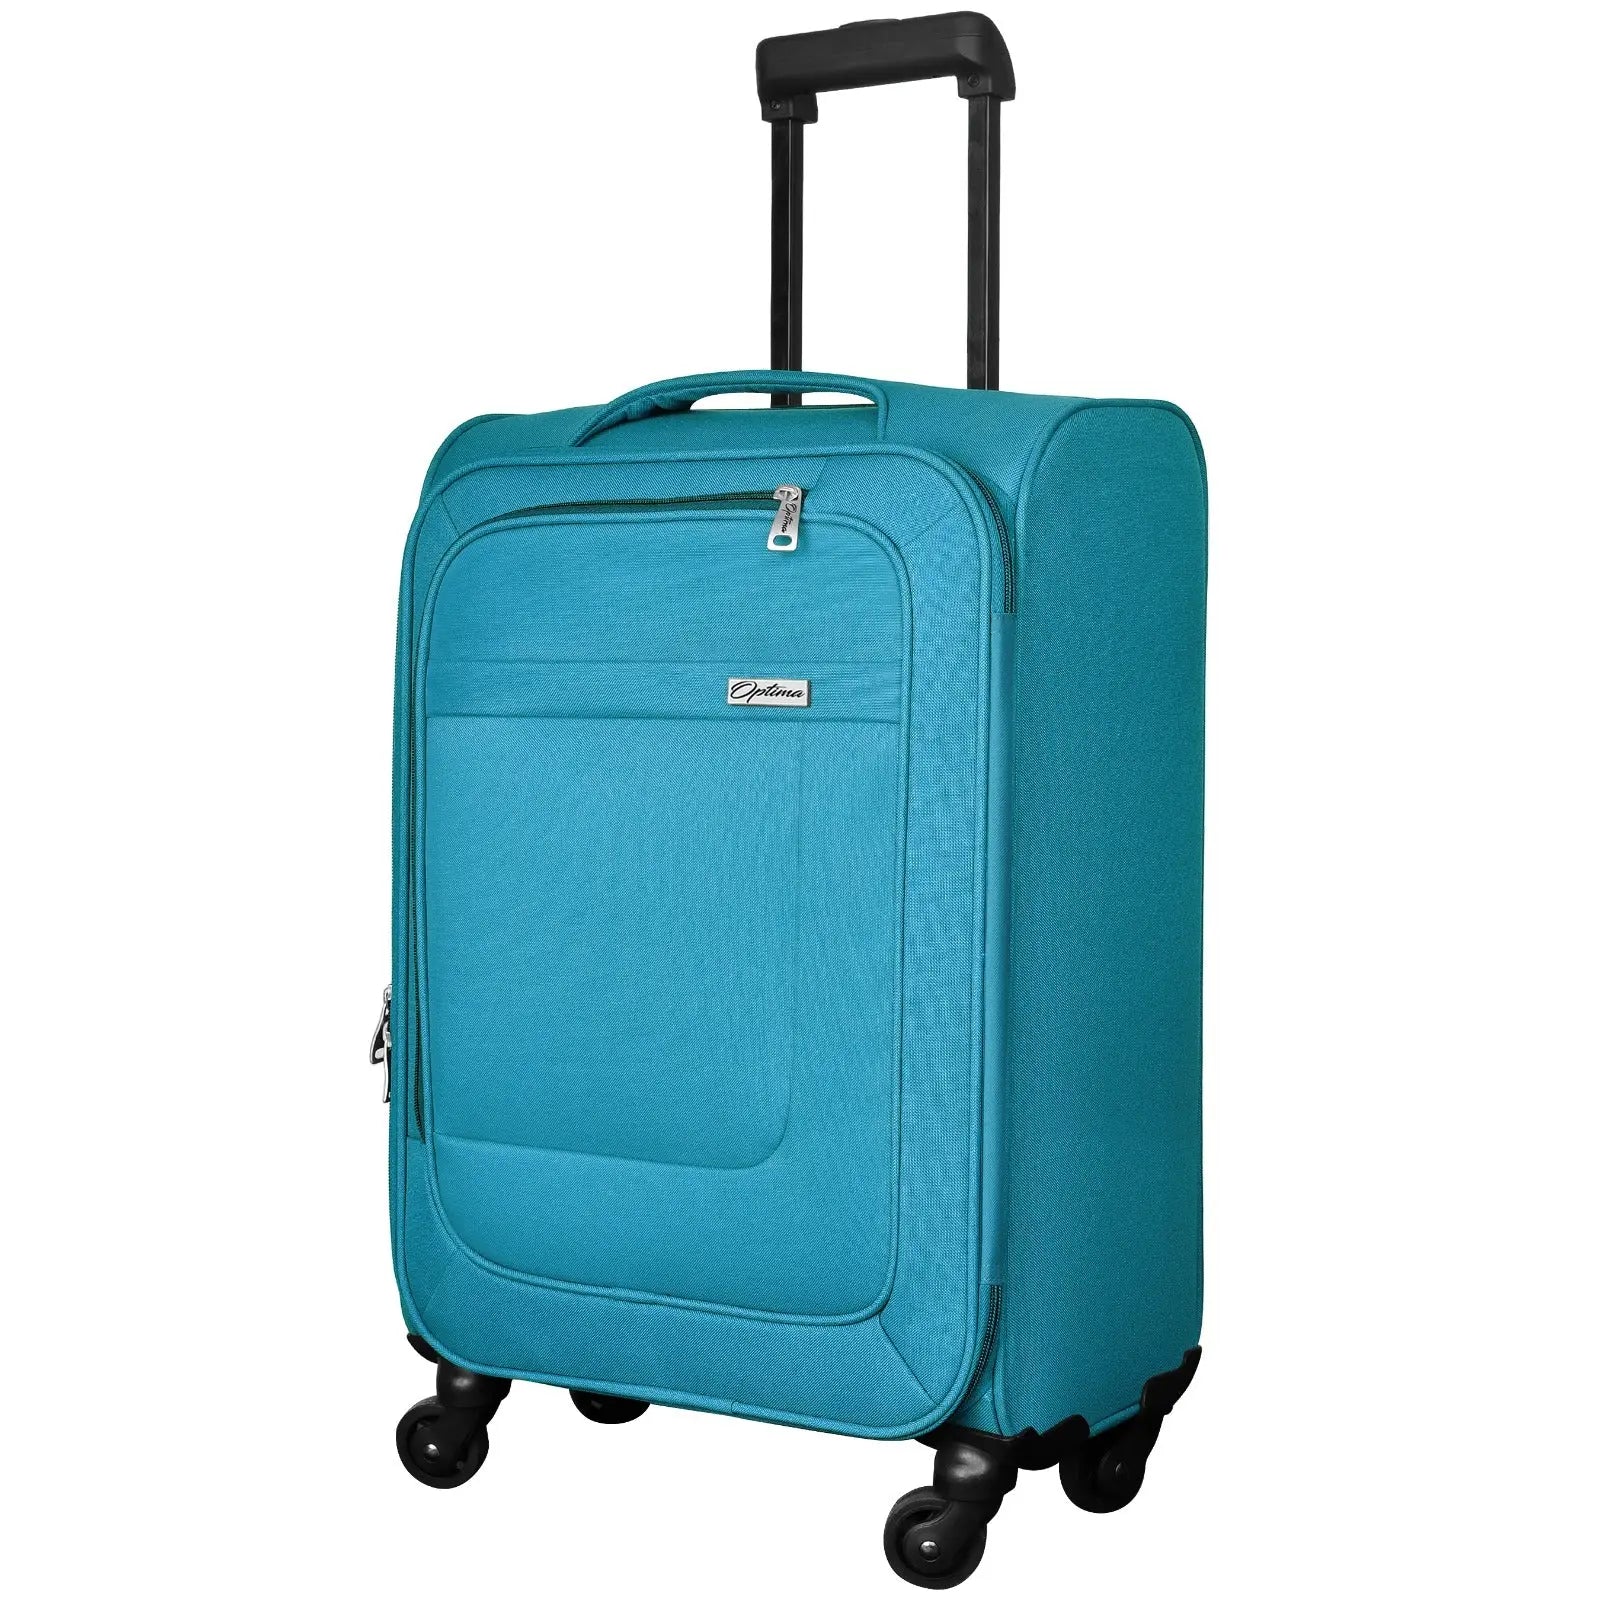 Buy Samsonite Trolley Bag Suitcase For Travel | Bricter 55 Cms Polyester  Softsided Small Cabin Luggage | Trolley Bag For Men Women online